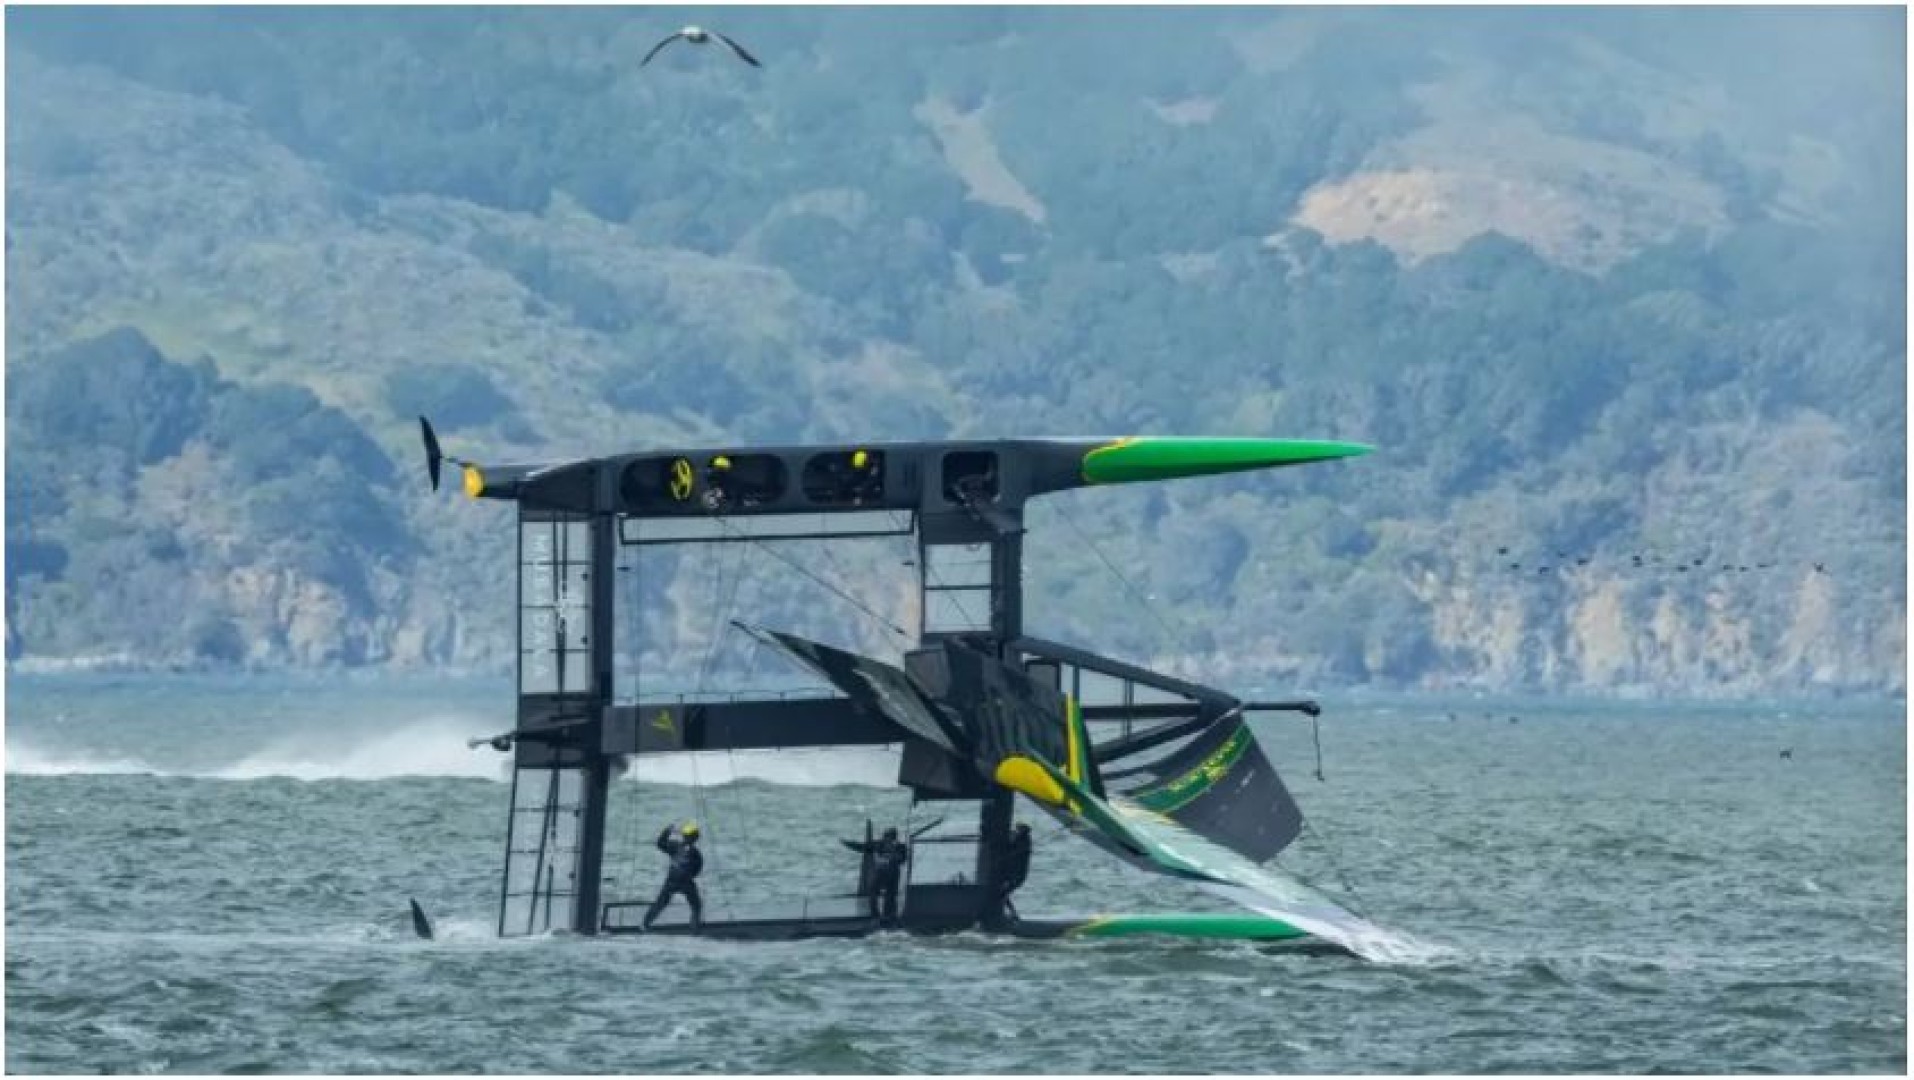 Australia capsized in San Francisco Bay during a practice